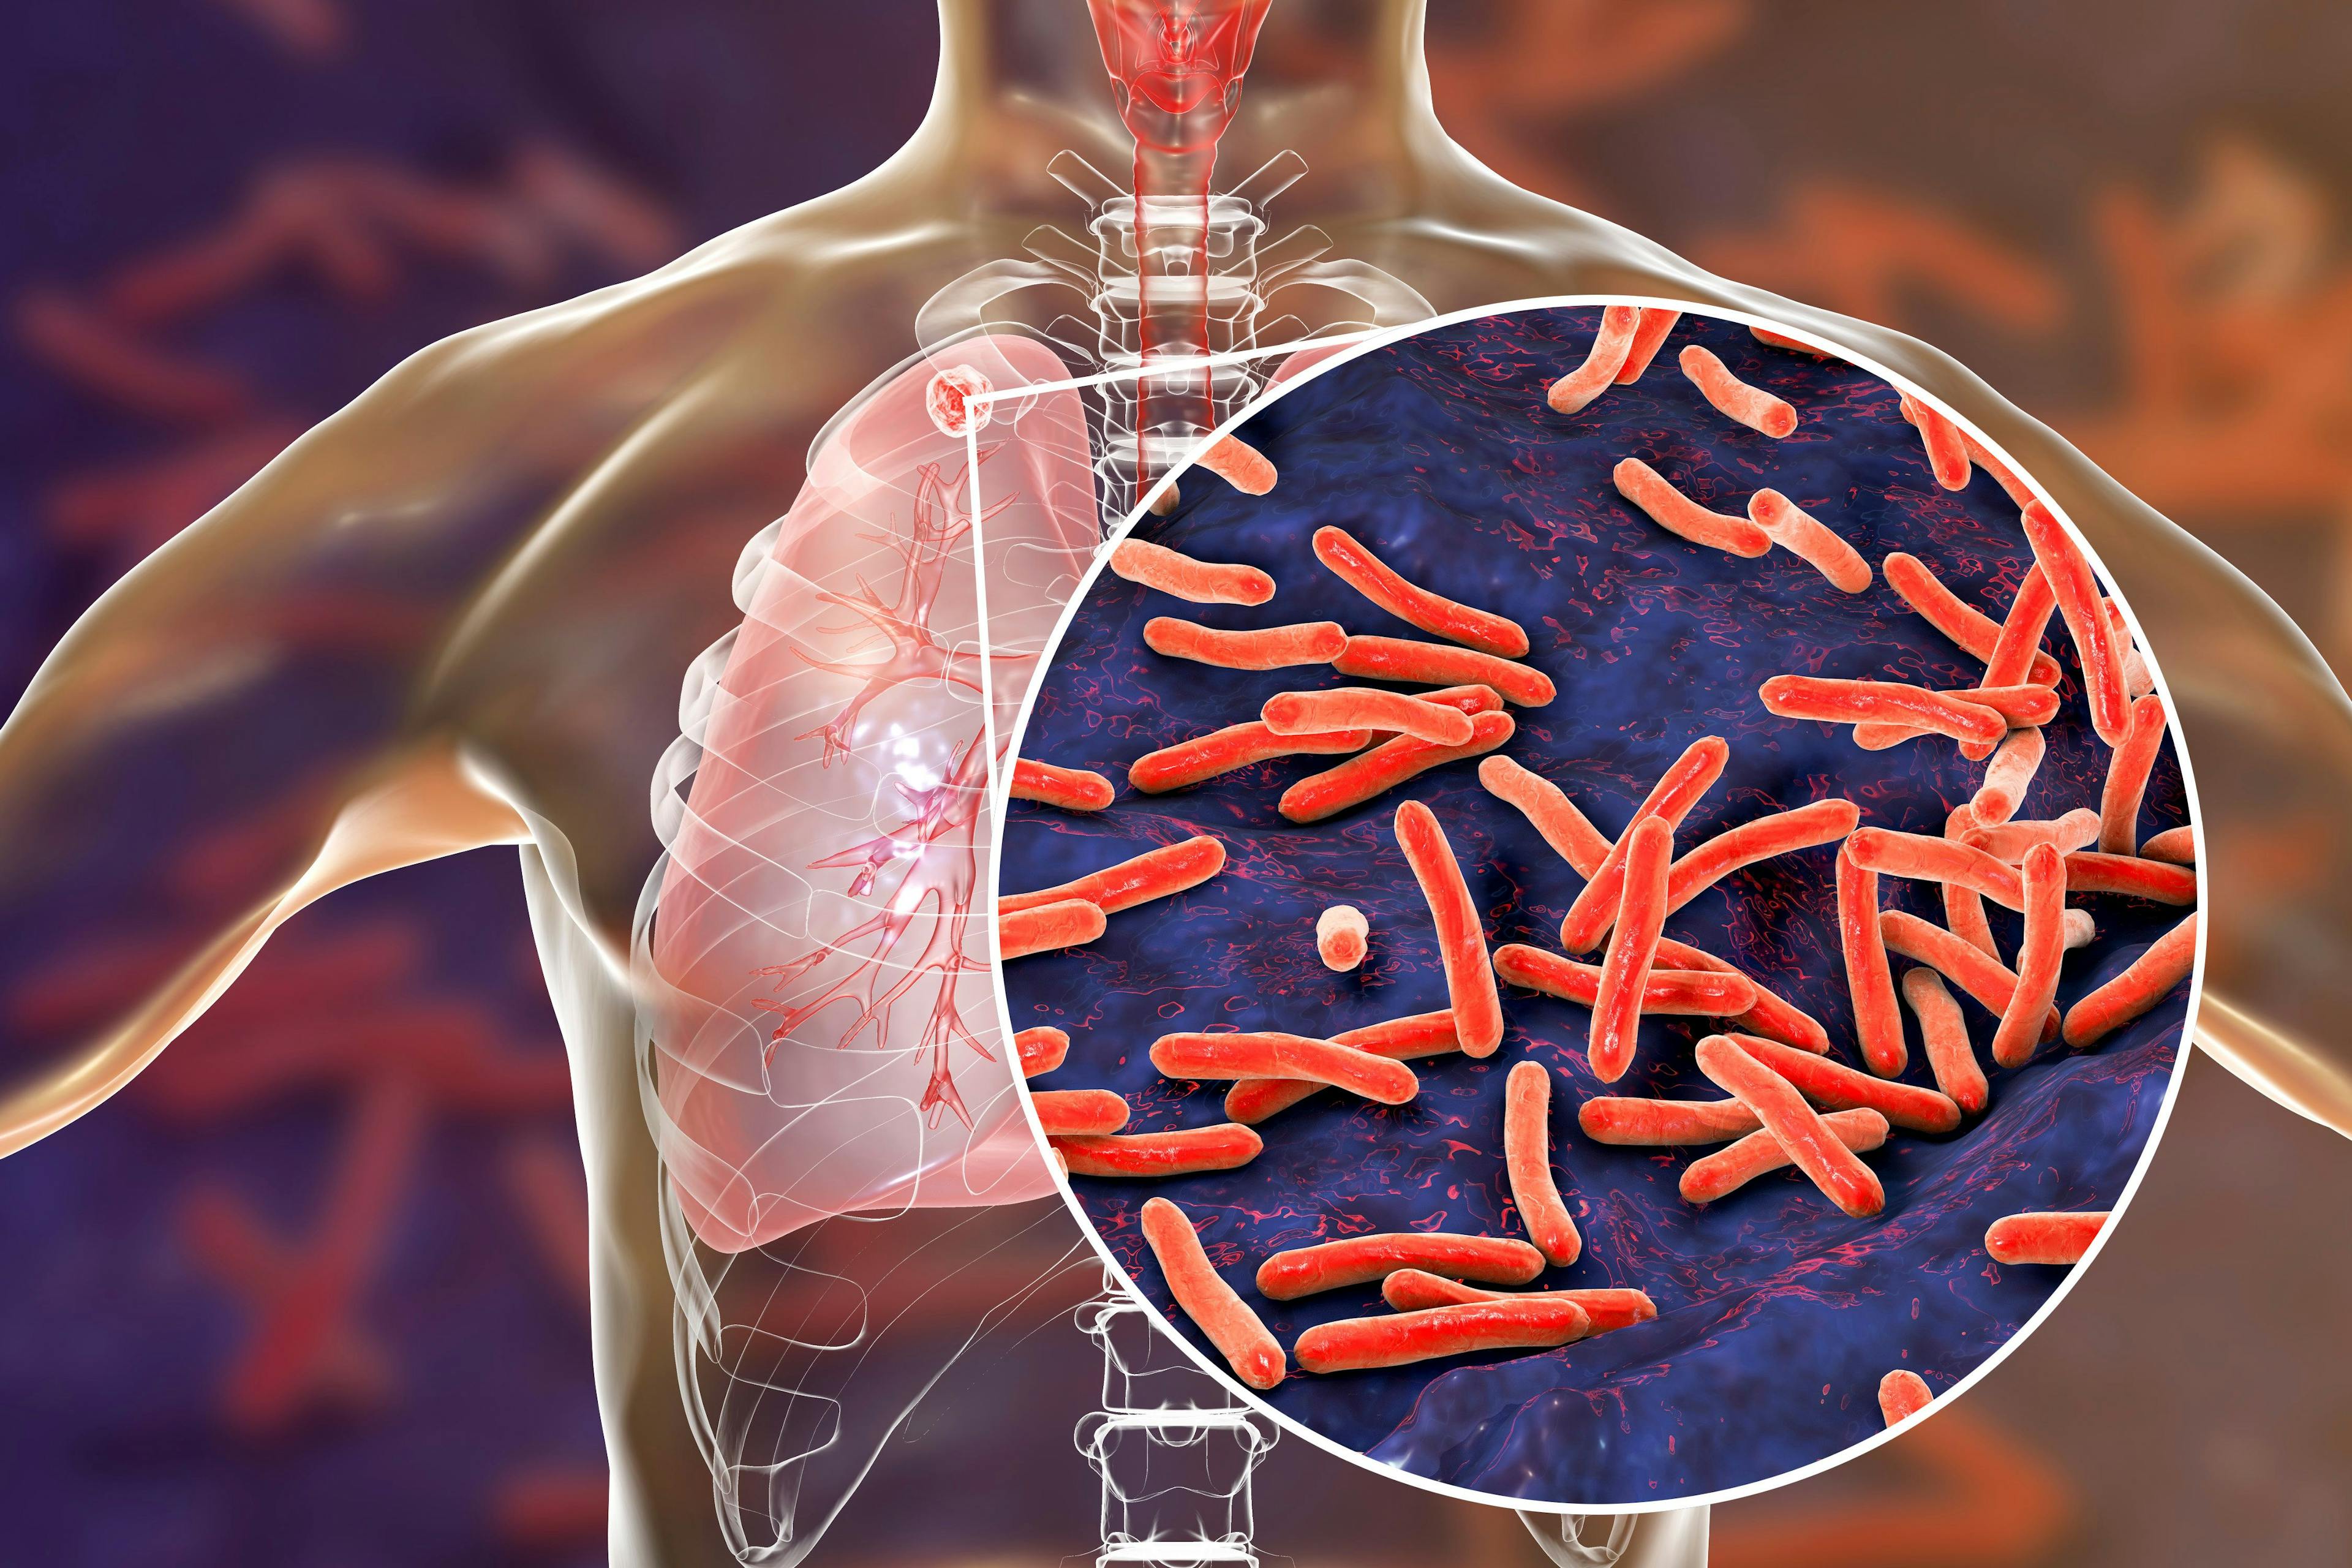 Secondary tuberculosis in lungs and close-up view of Mycobacterium tuberculosis bacteria, 3D illustration | Image Credit: © Dr_Microbe - stock.adobe.com